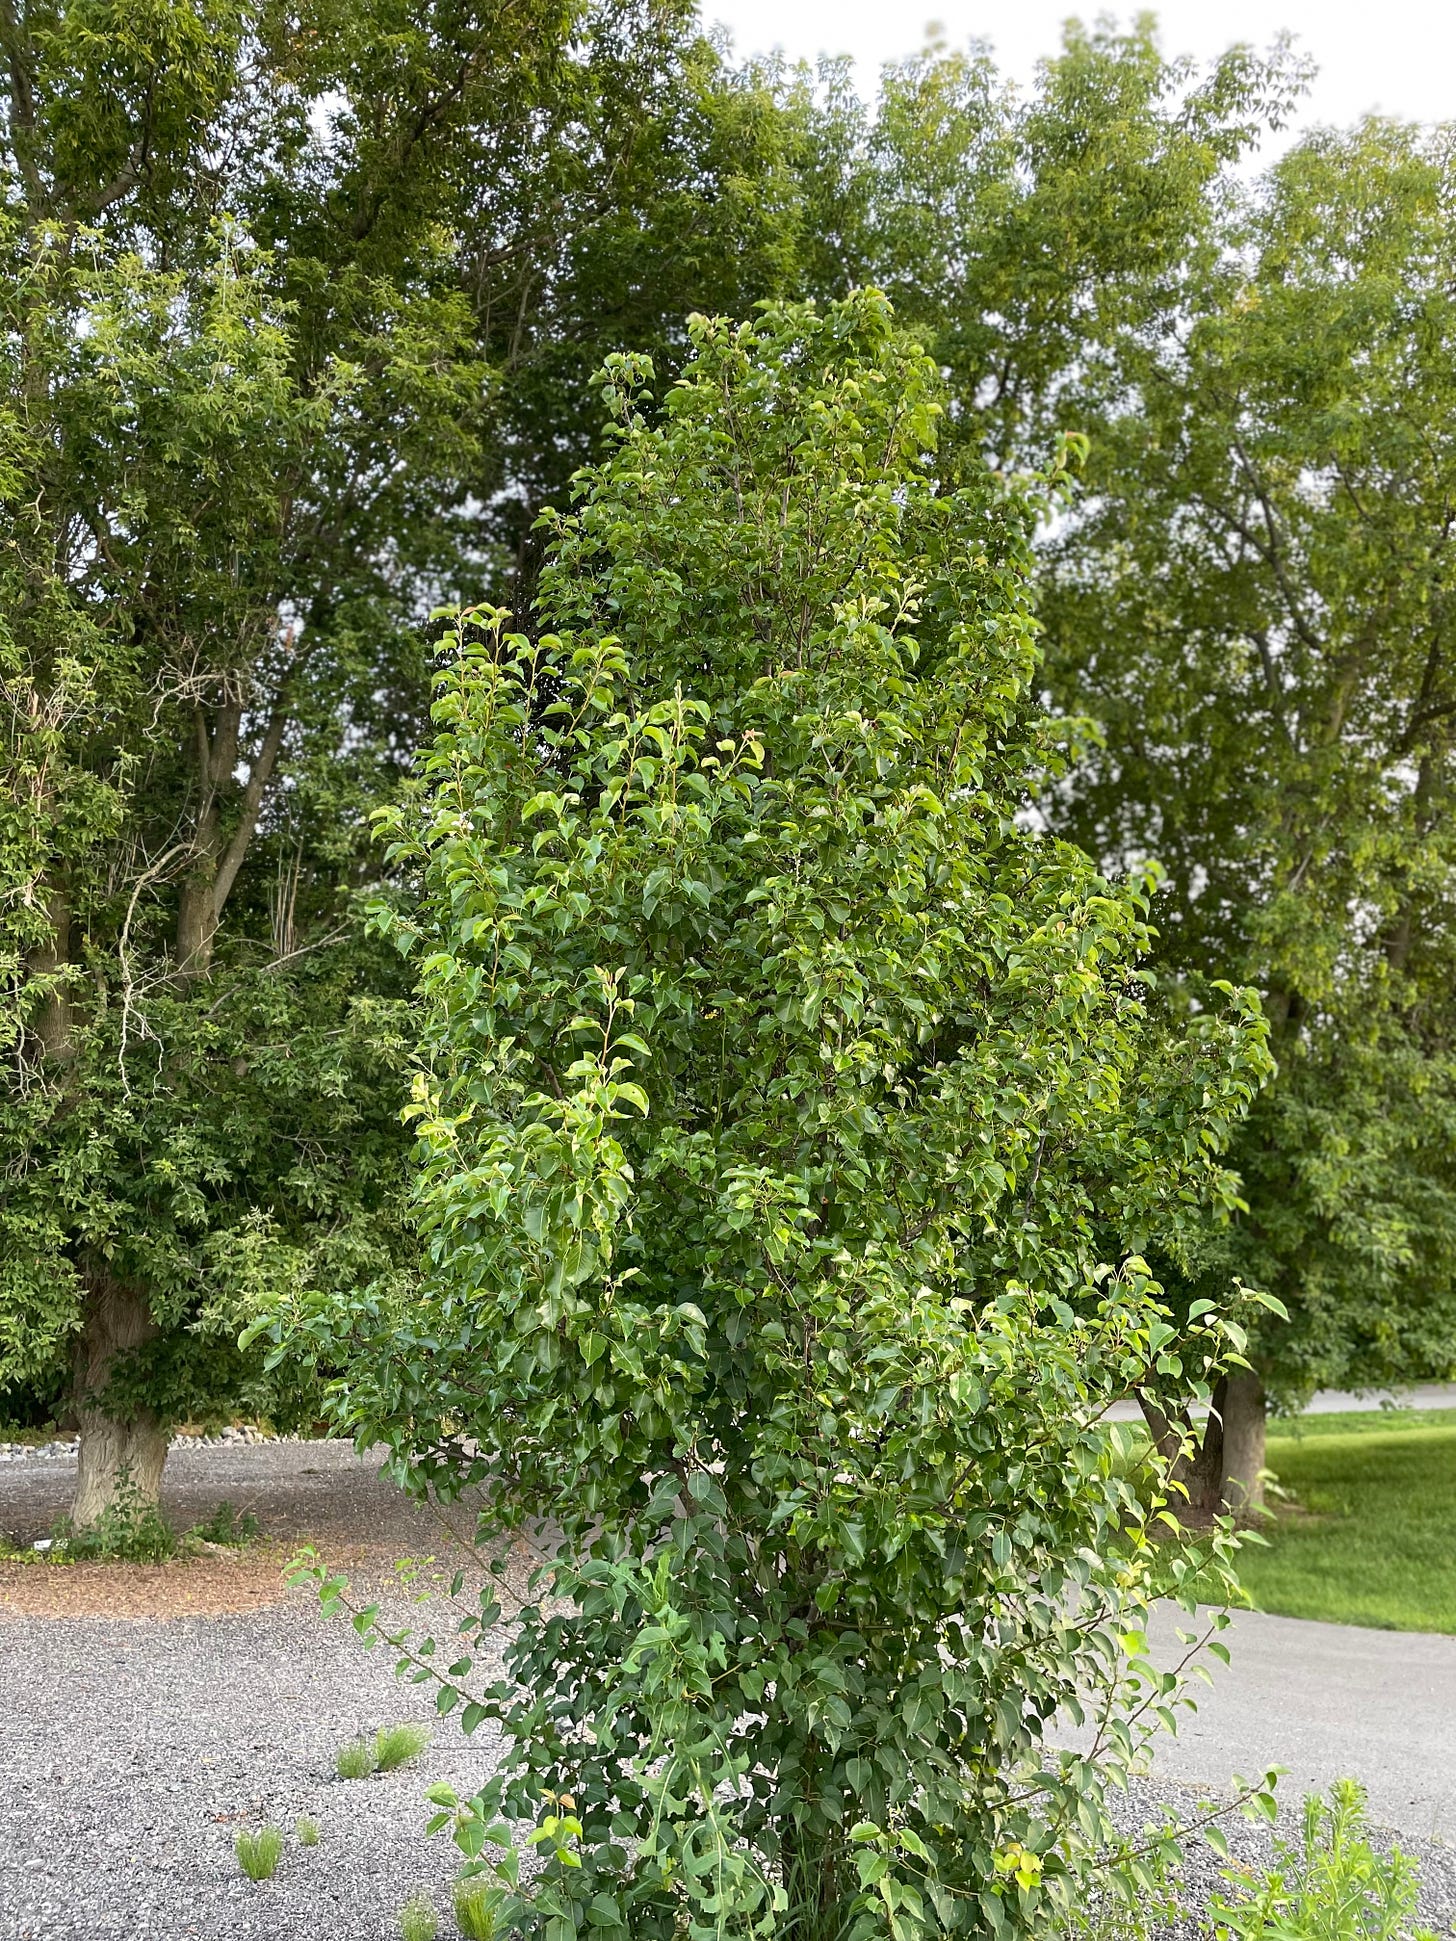 A picture of a small tree in front of two larger trees